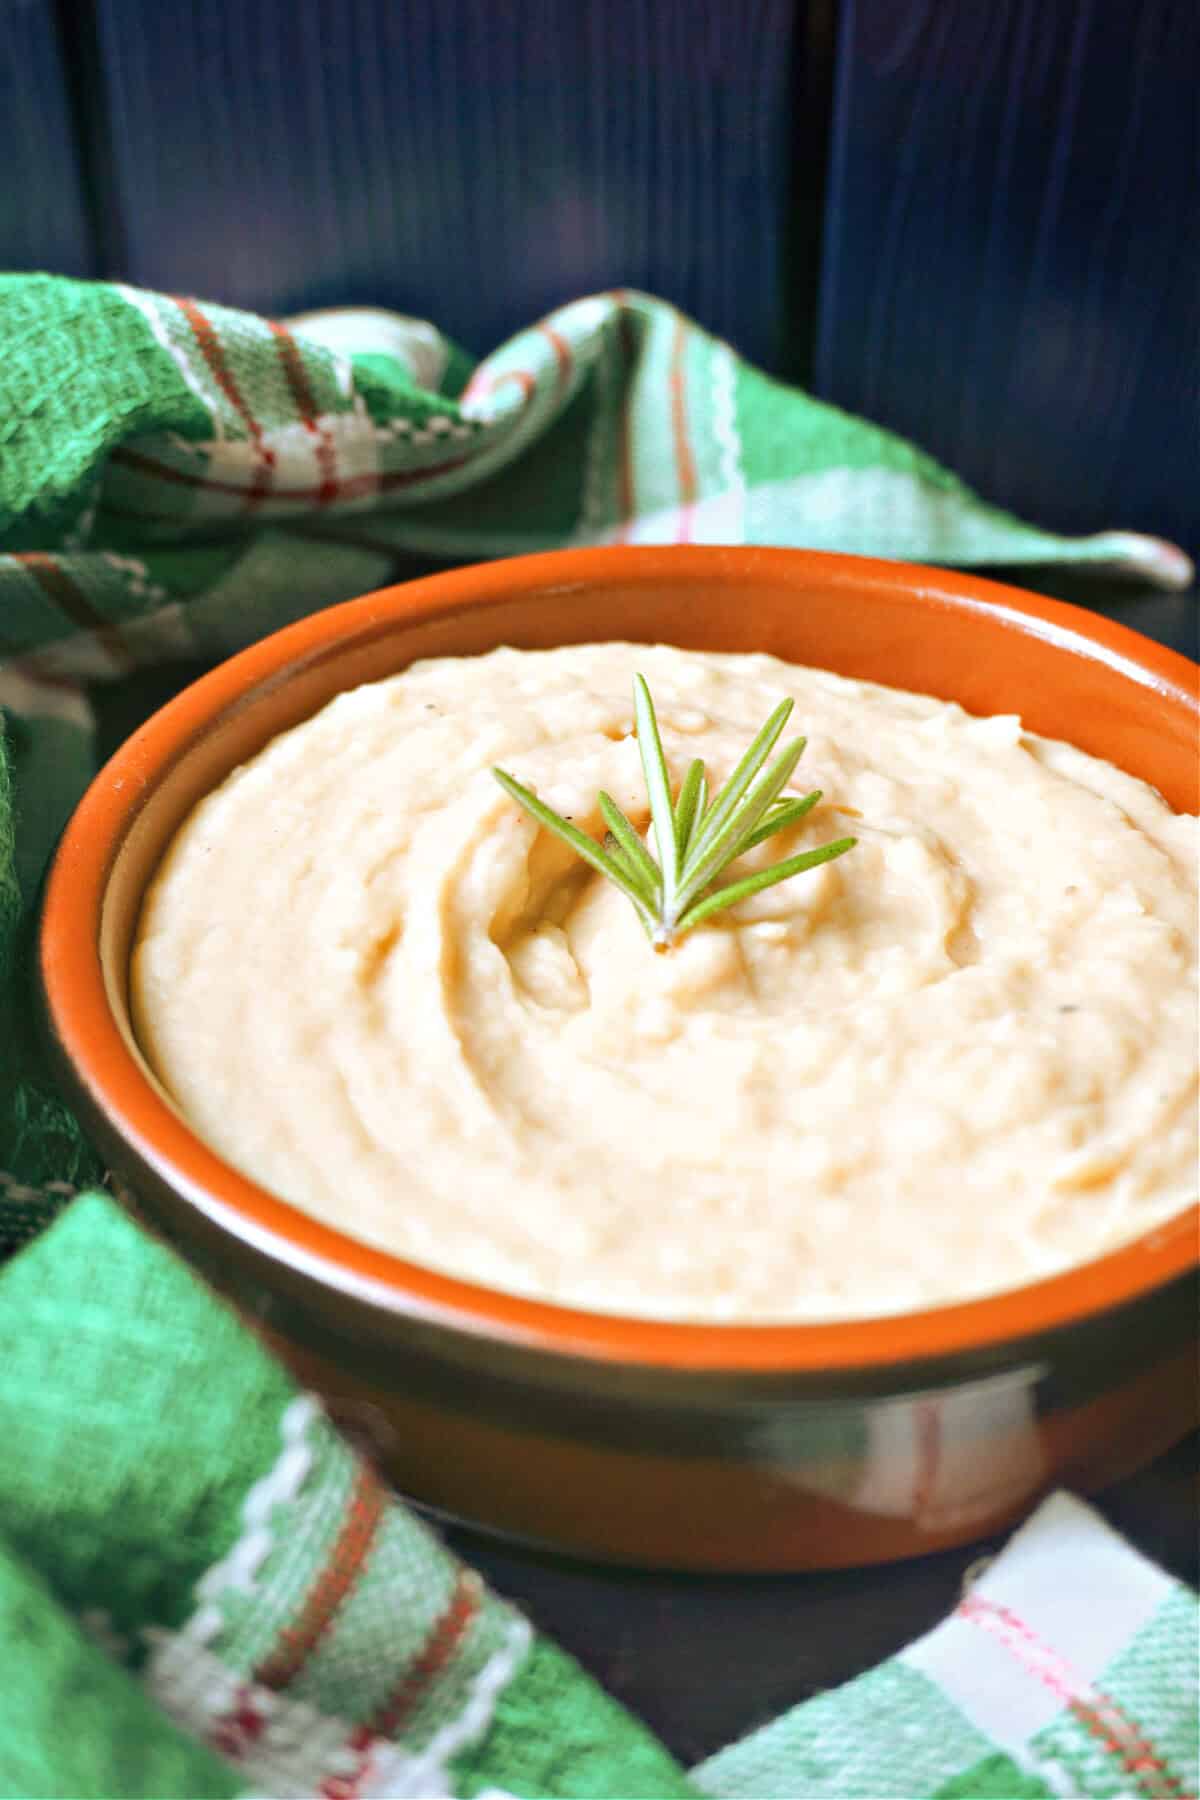 A brown bowl with bean mash garnished with a small rosemary sprig.